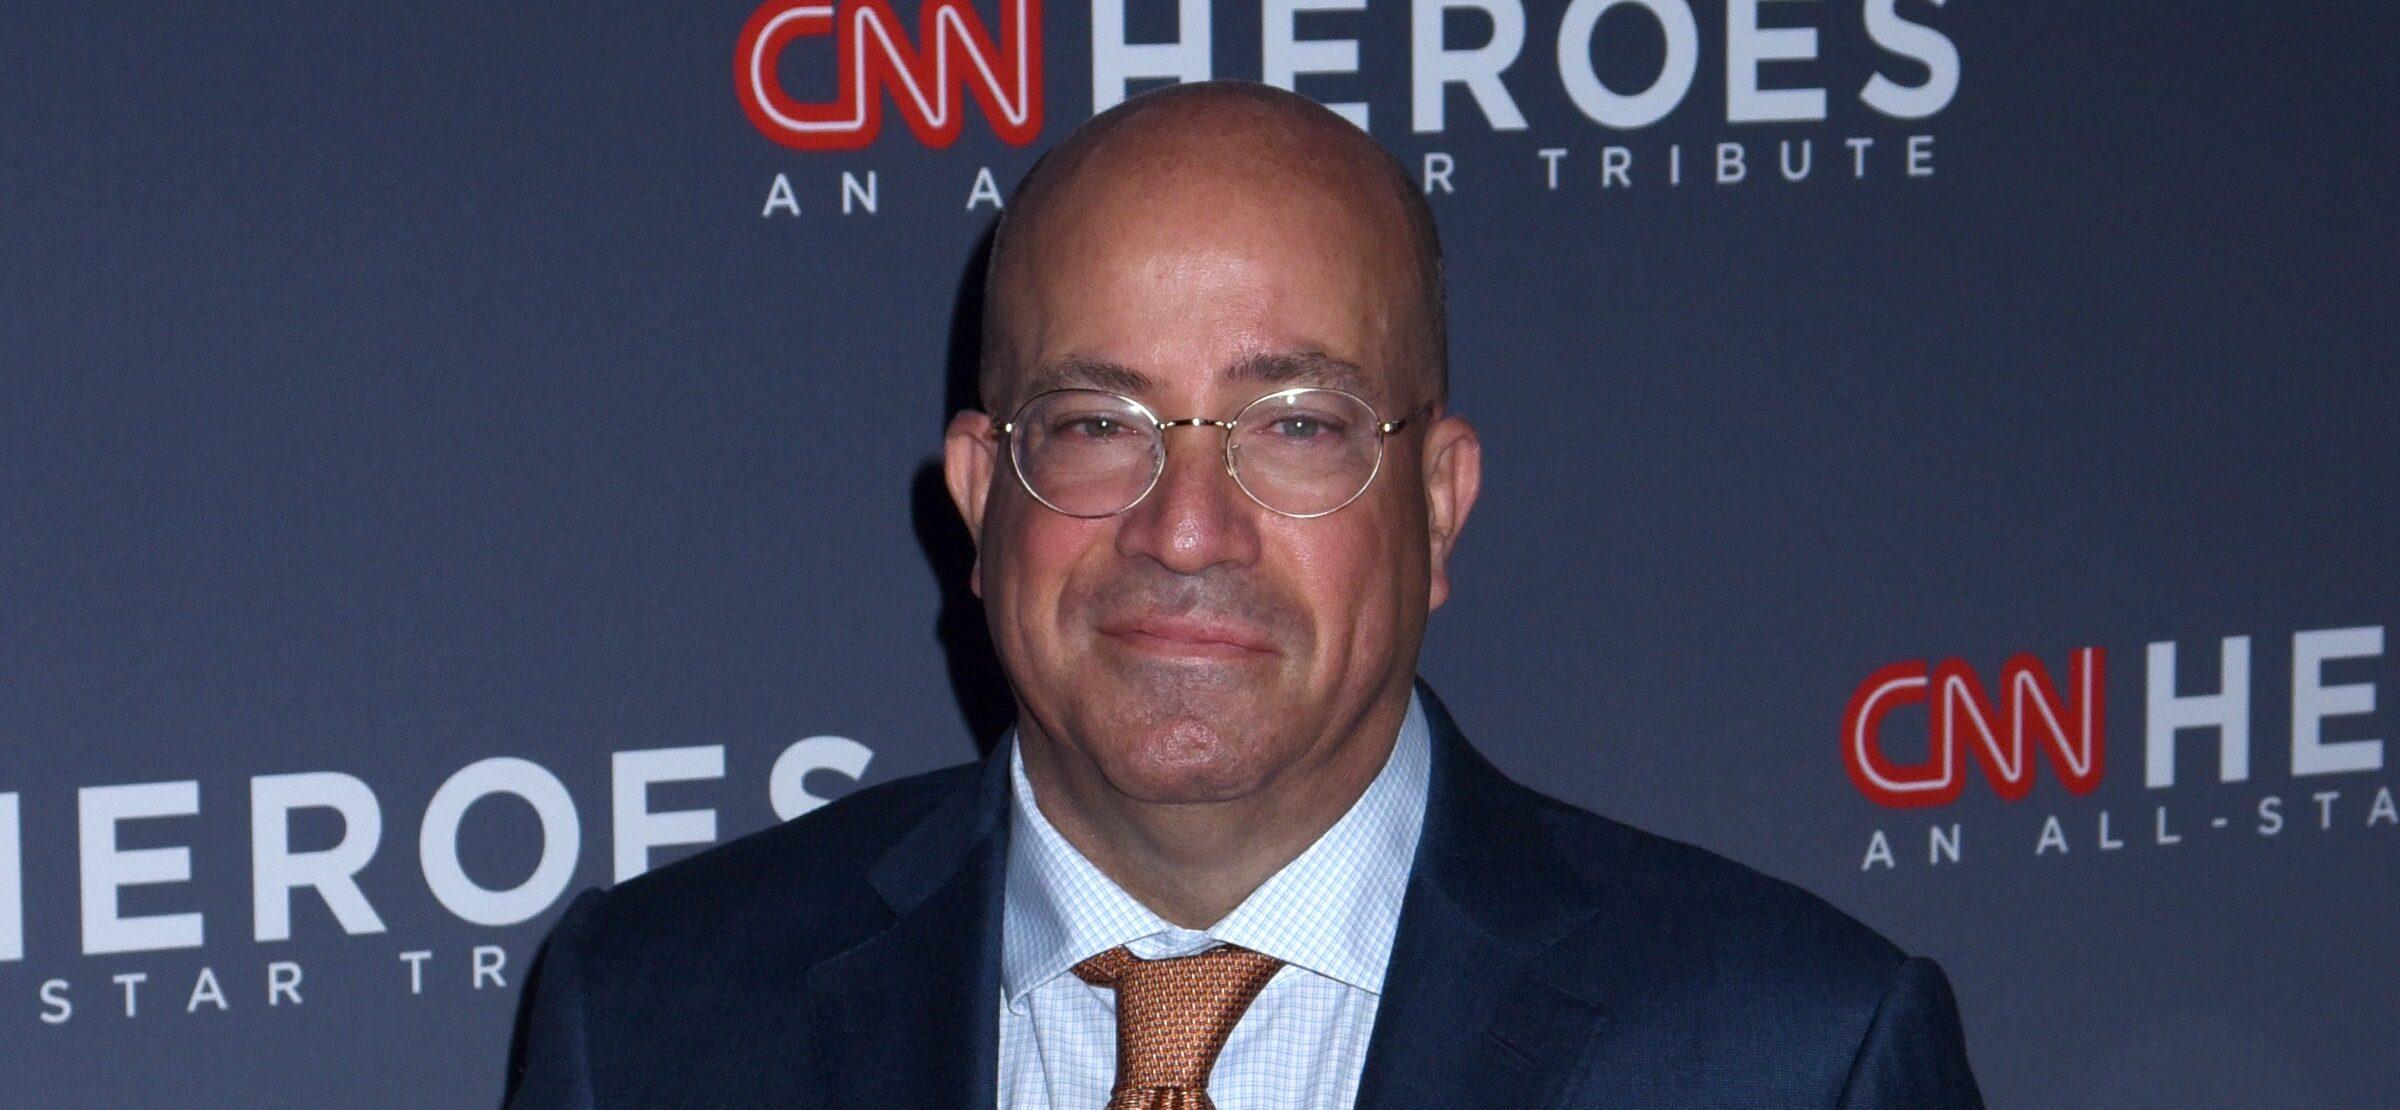 CNN Boss Jeff Zucker Resigns After Failing To Disclose Relationship With Colleague